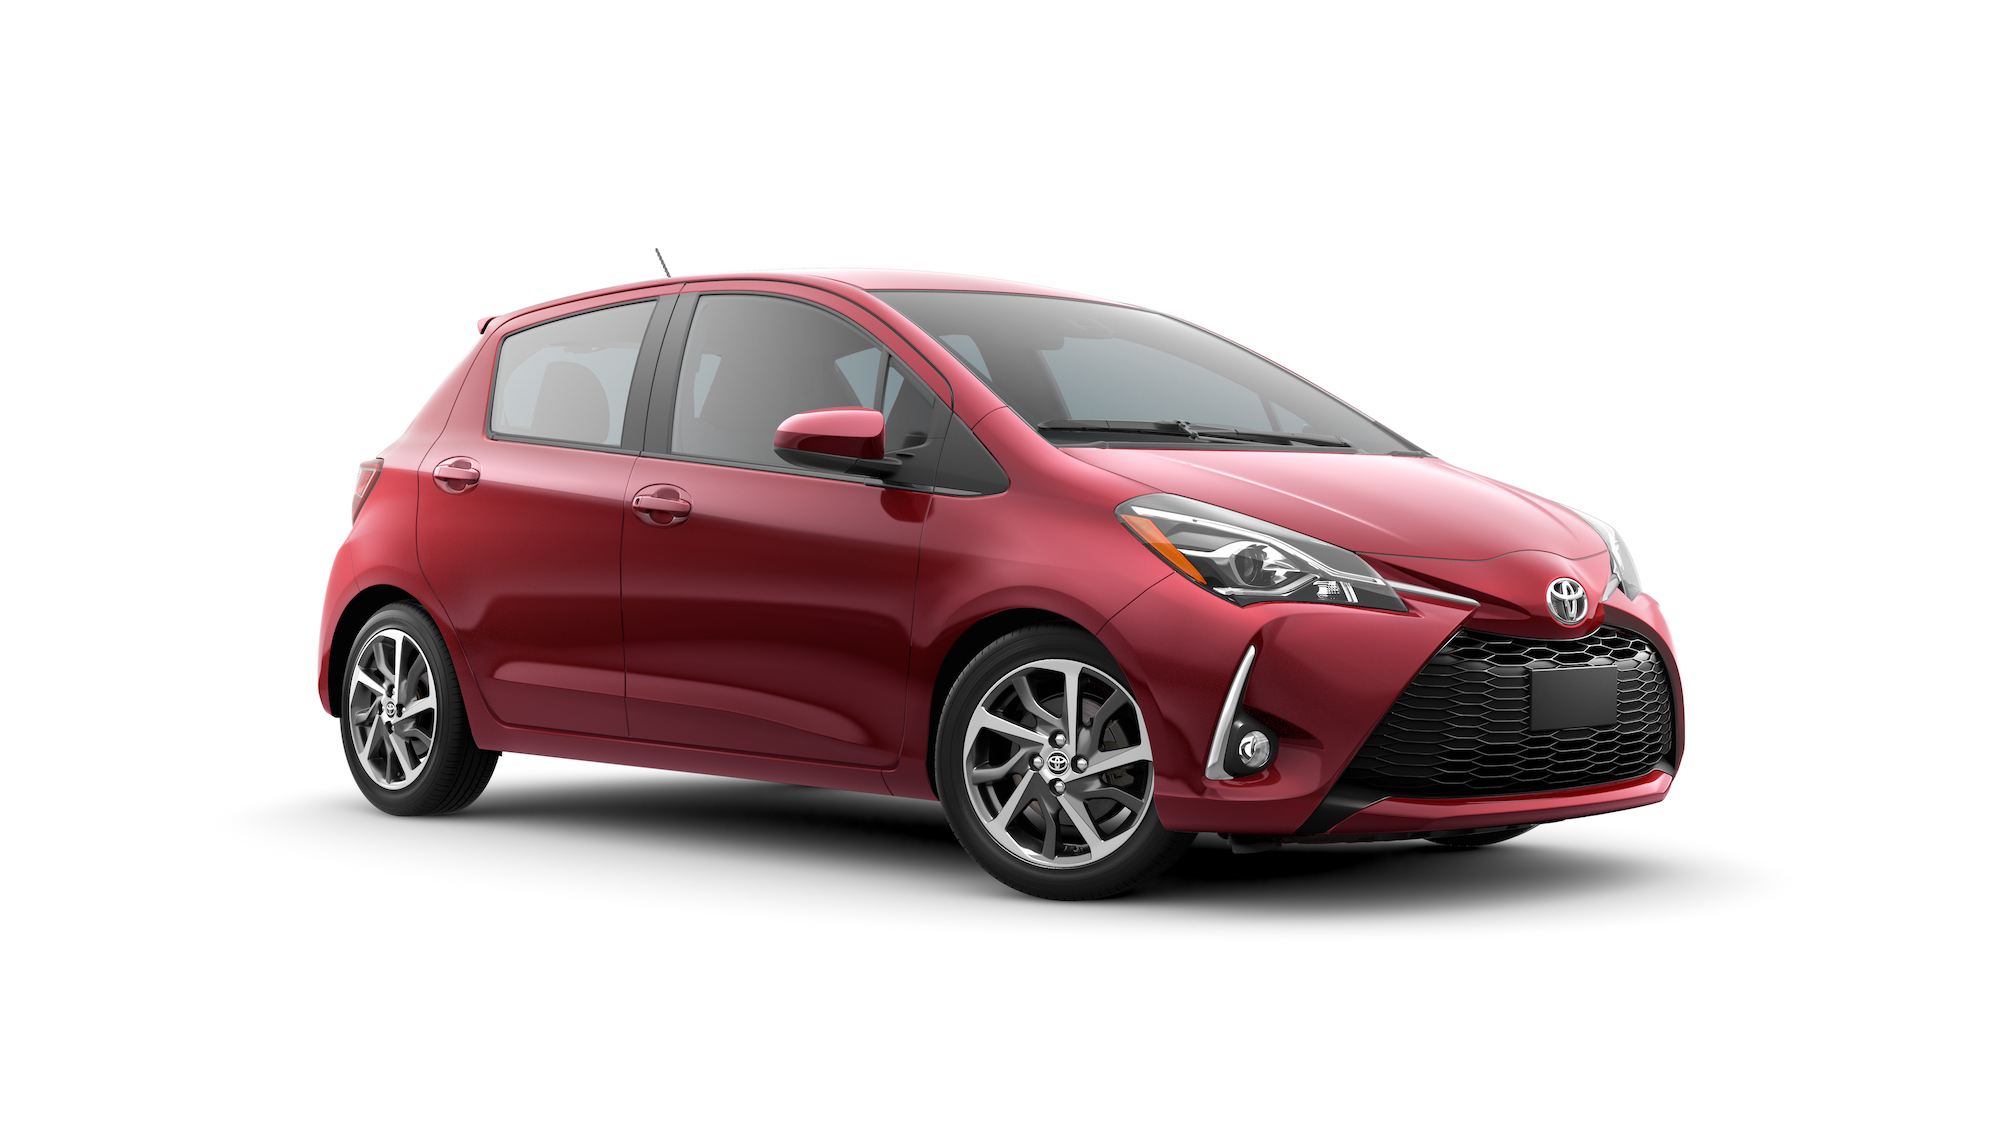 A red 2020 Toyota Yaris SE hatchback on a white background